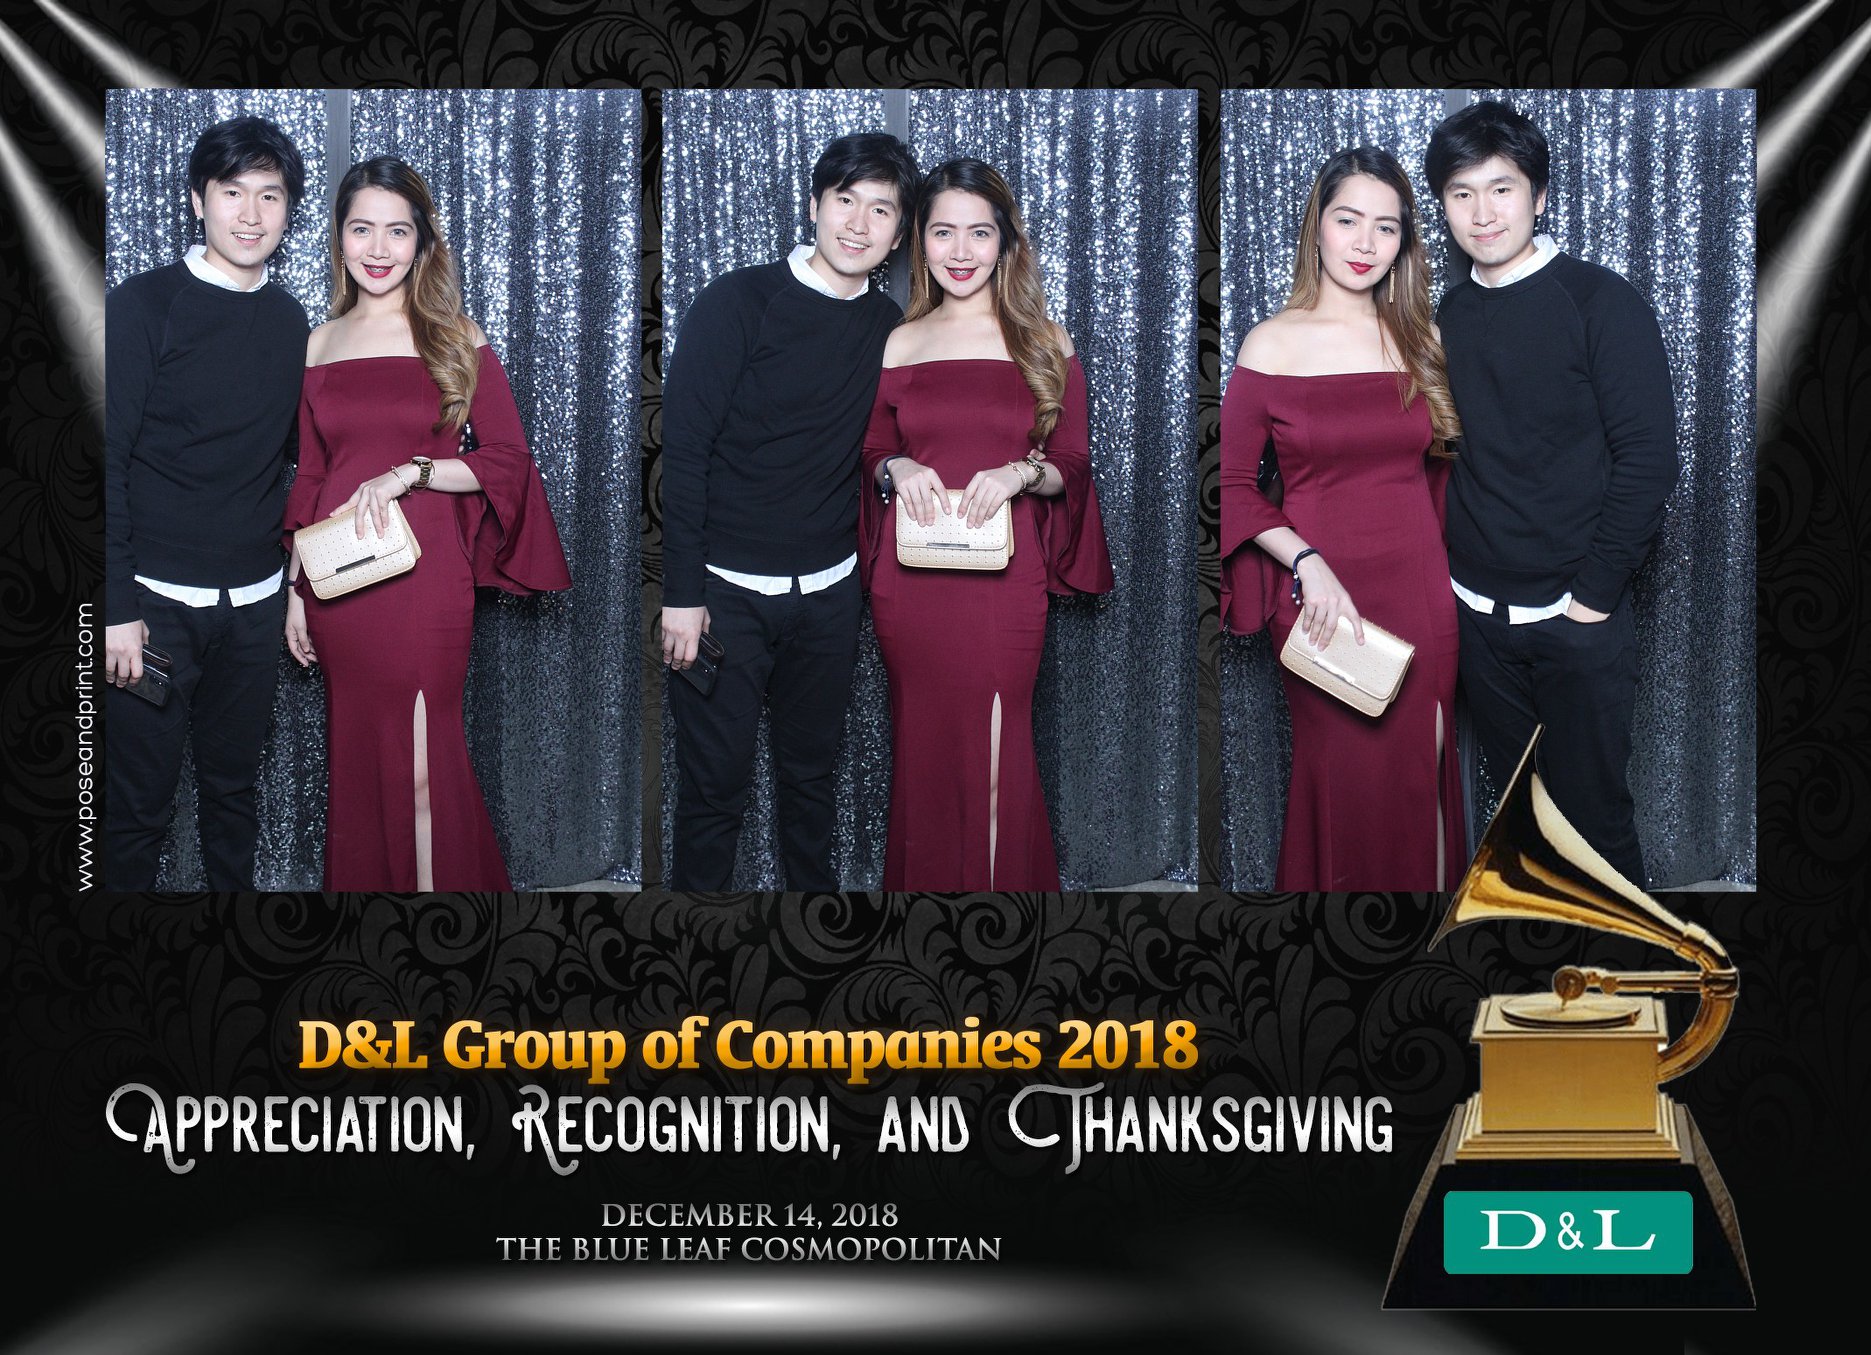 D&L Group of Companies 2018 – Mirror Booth